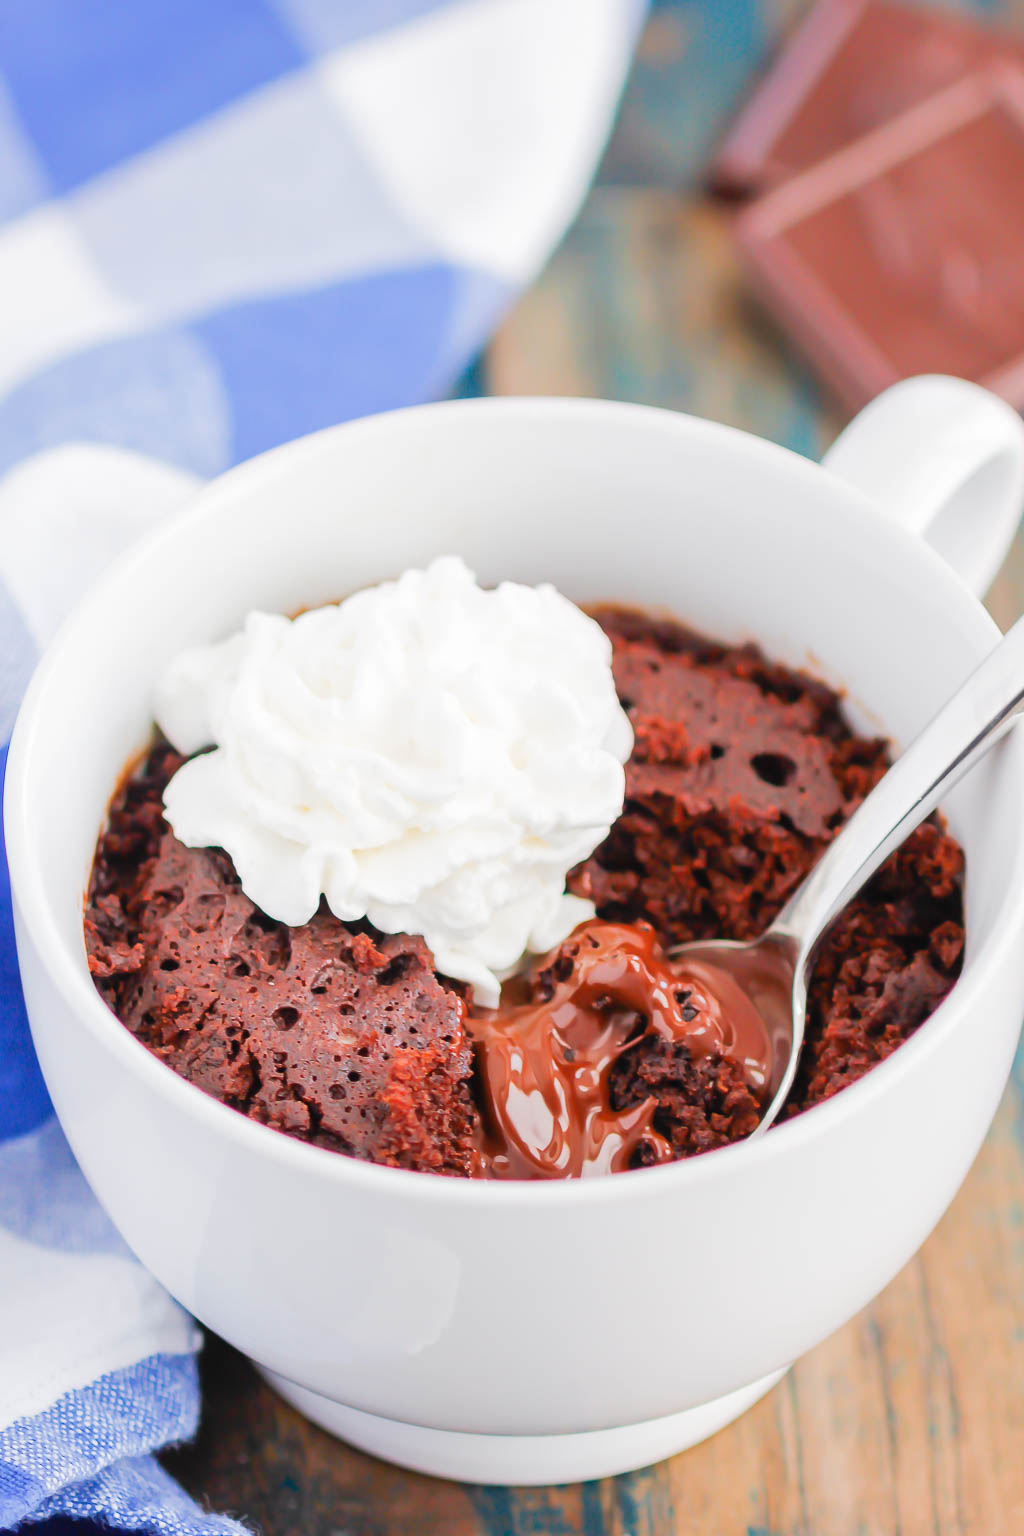 Chocolate Lava Mug Cake is moist and fudgy, with a warm molten center. Made in the microwave and ready in minutes, this easy treat is perfect for chocolate lovers!